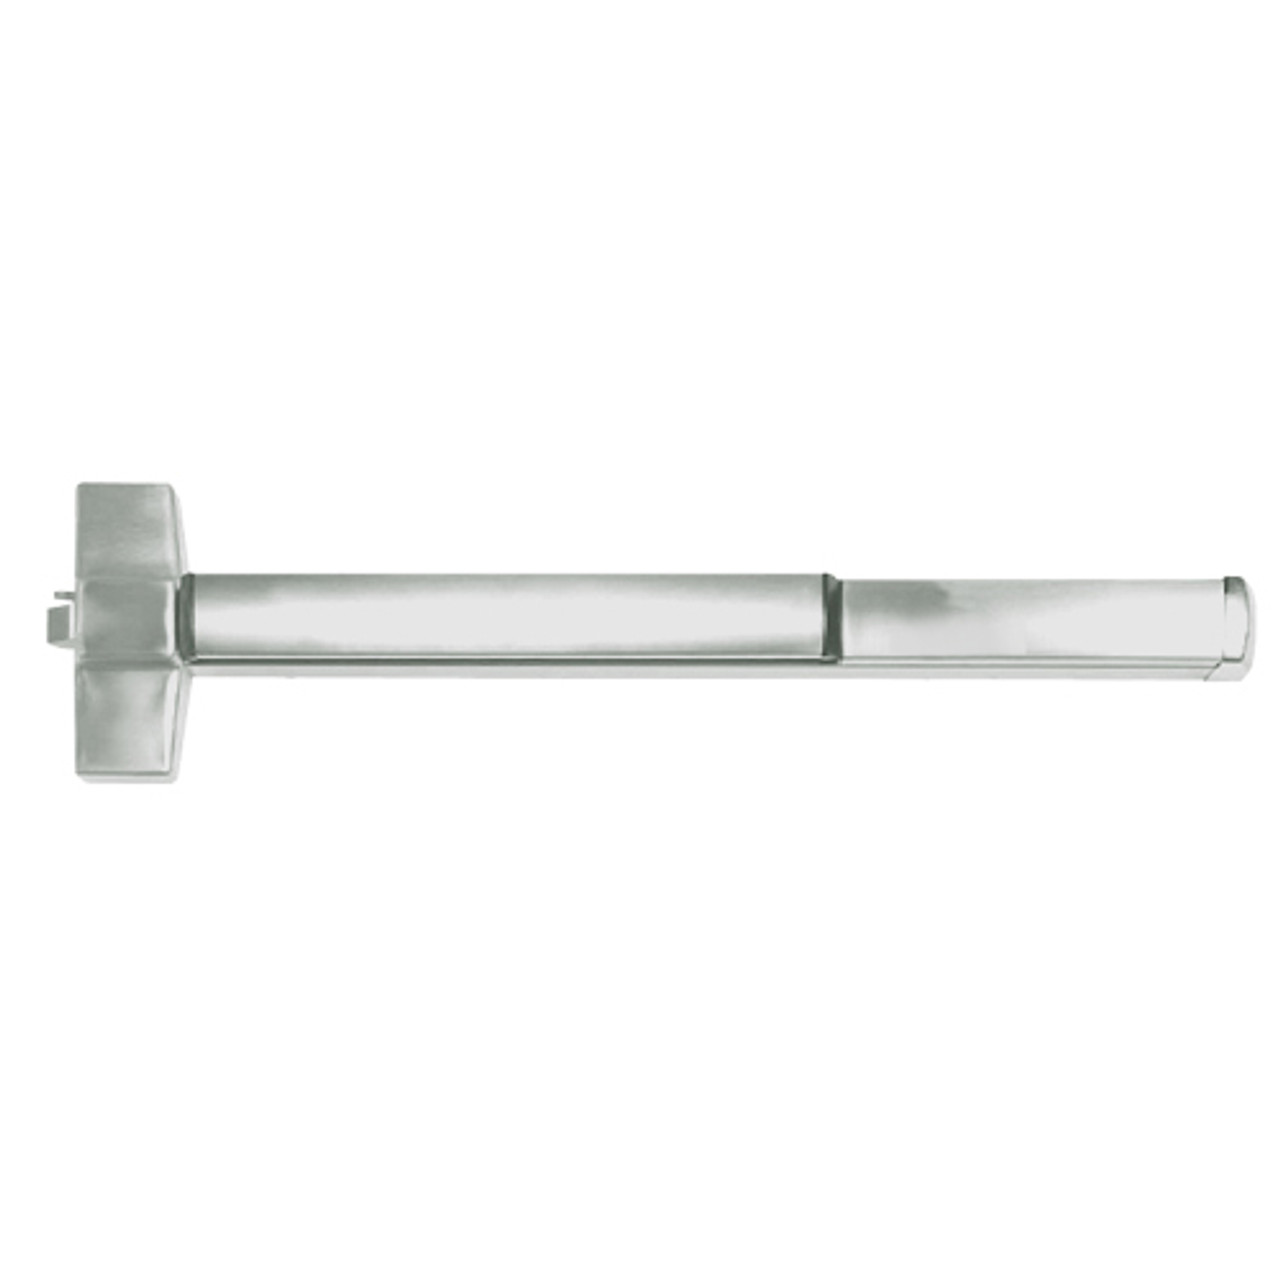 ED5200A-619 Corbin ED5200 Series Fire Rated Rim Exit Device in Satin Nickel Finish